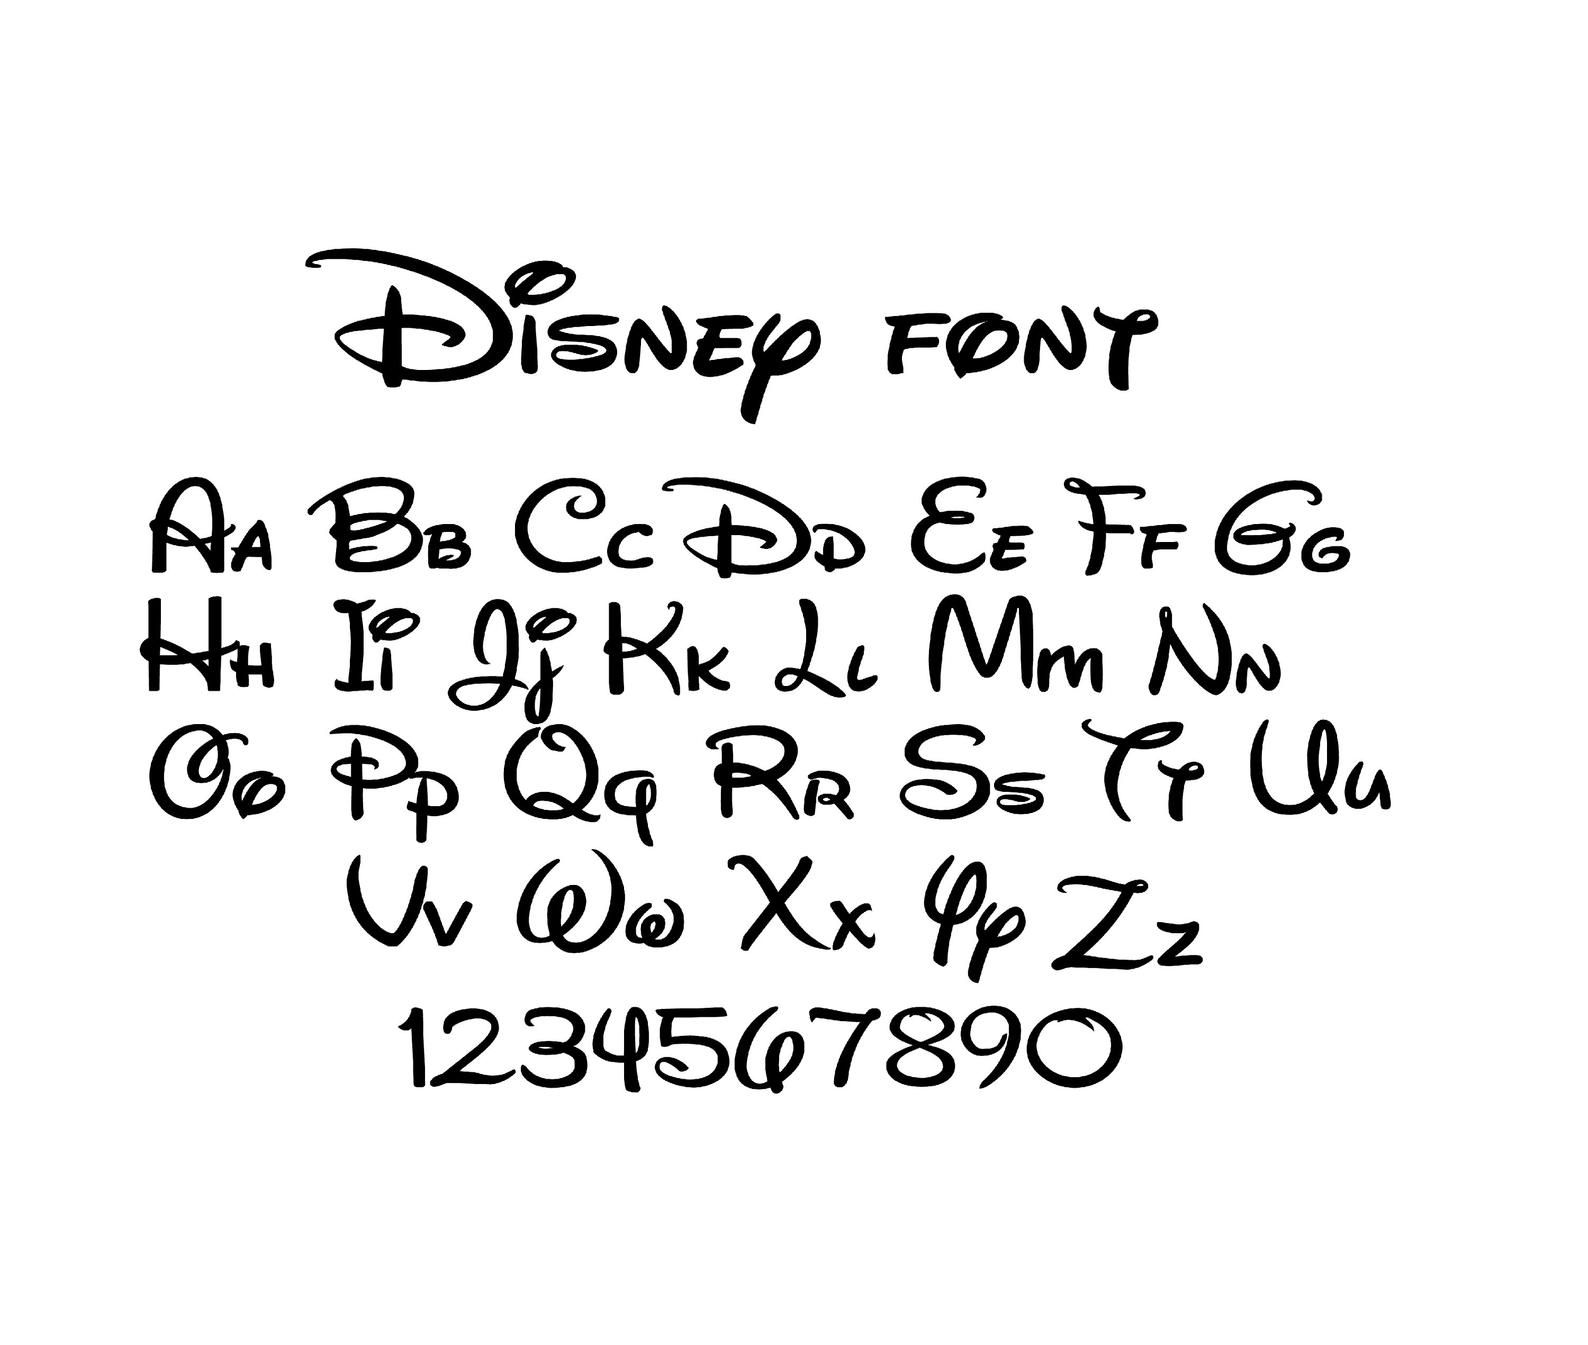 disney font free download for photoshop